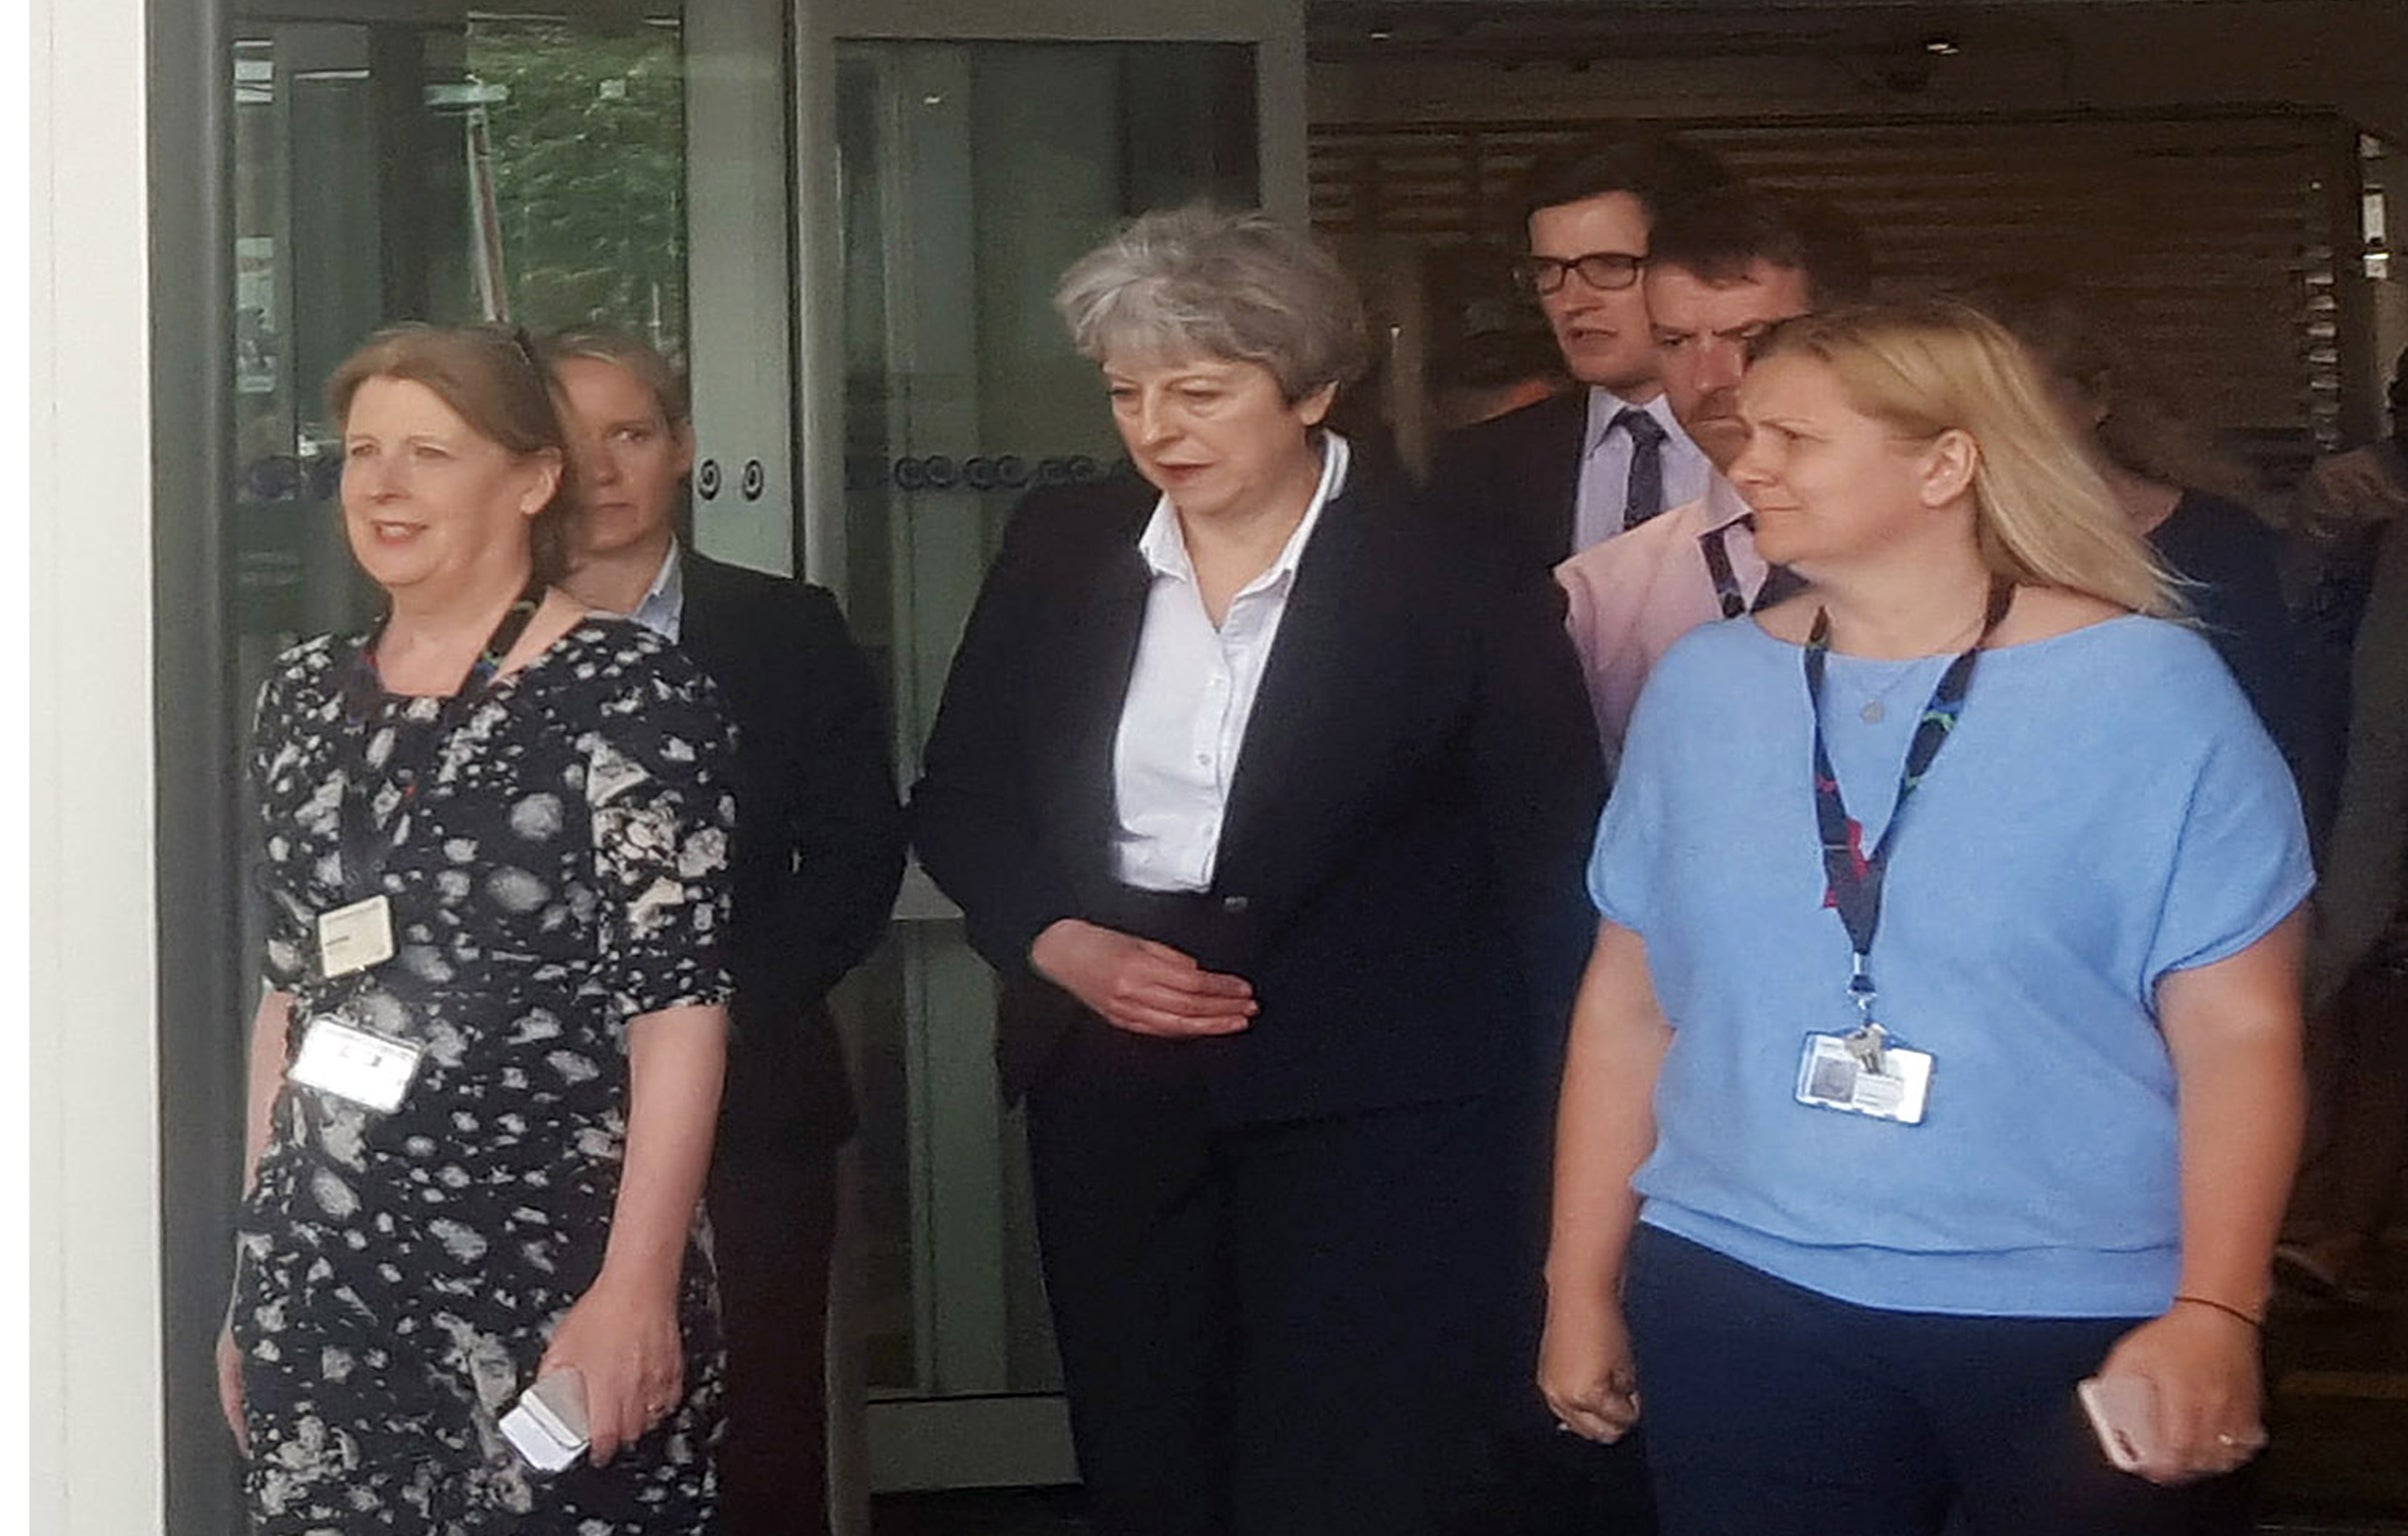 Theresa May leaves the Chelsea and Westminster Hospital in London after visiting people who were injured in the Grenfell Tower fire